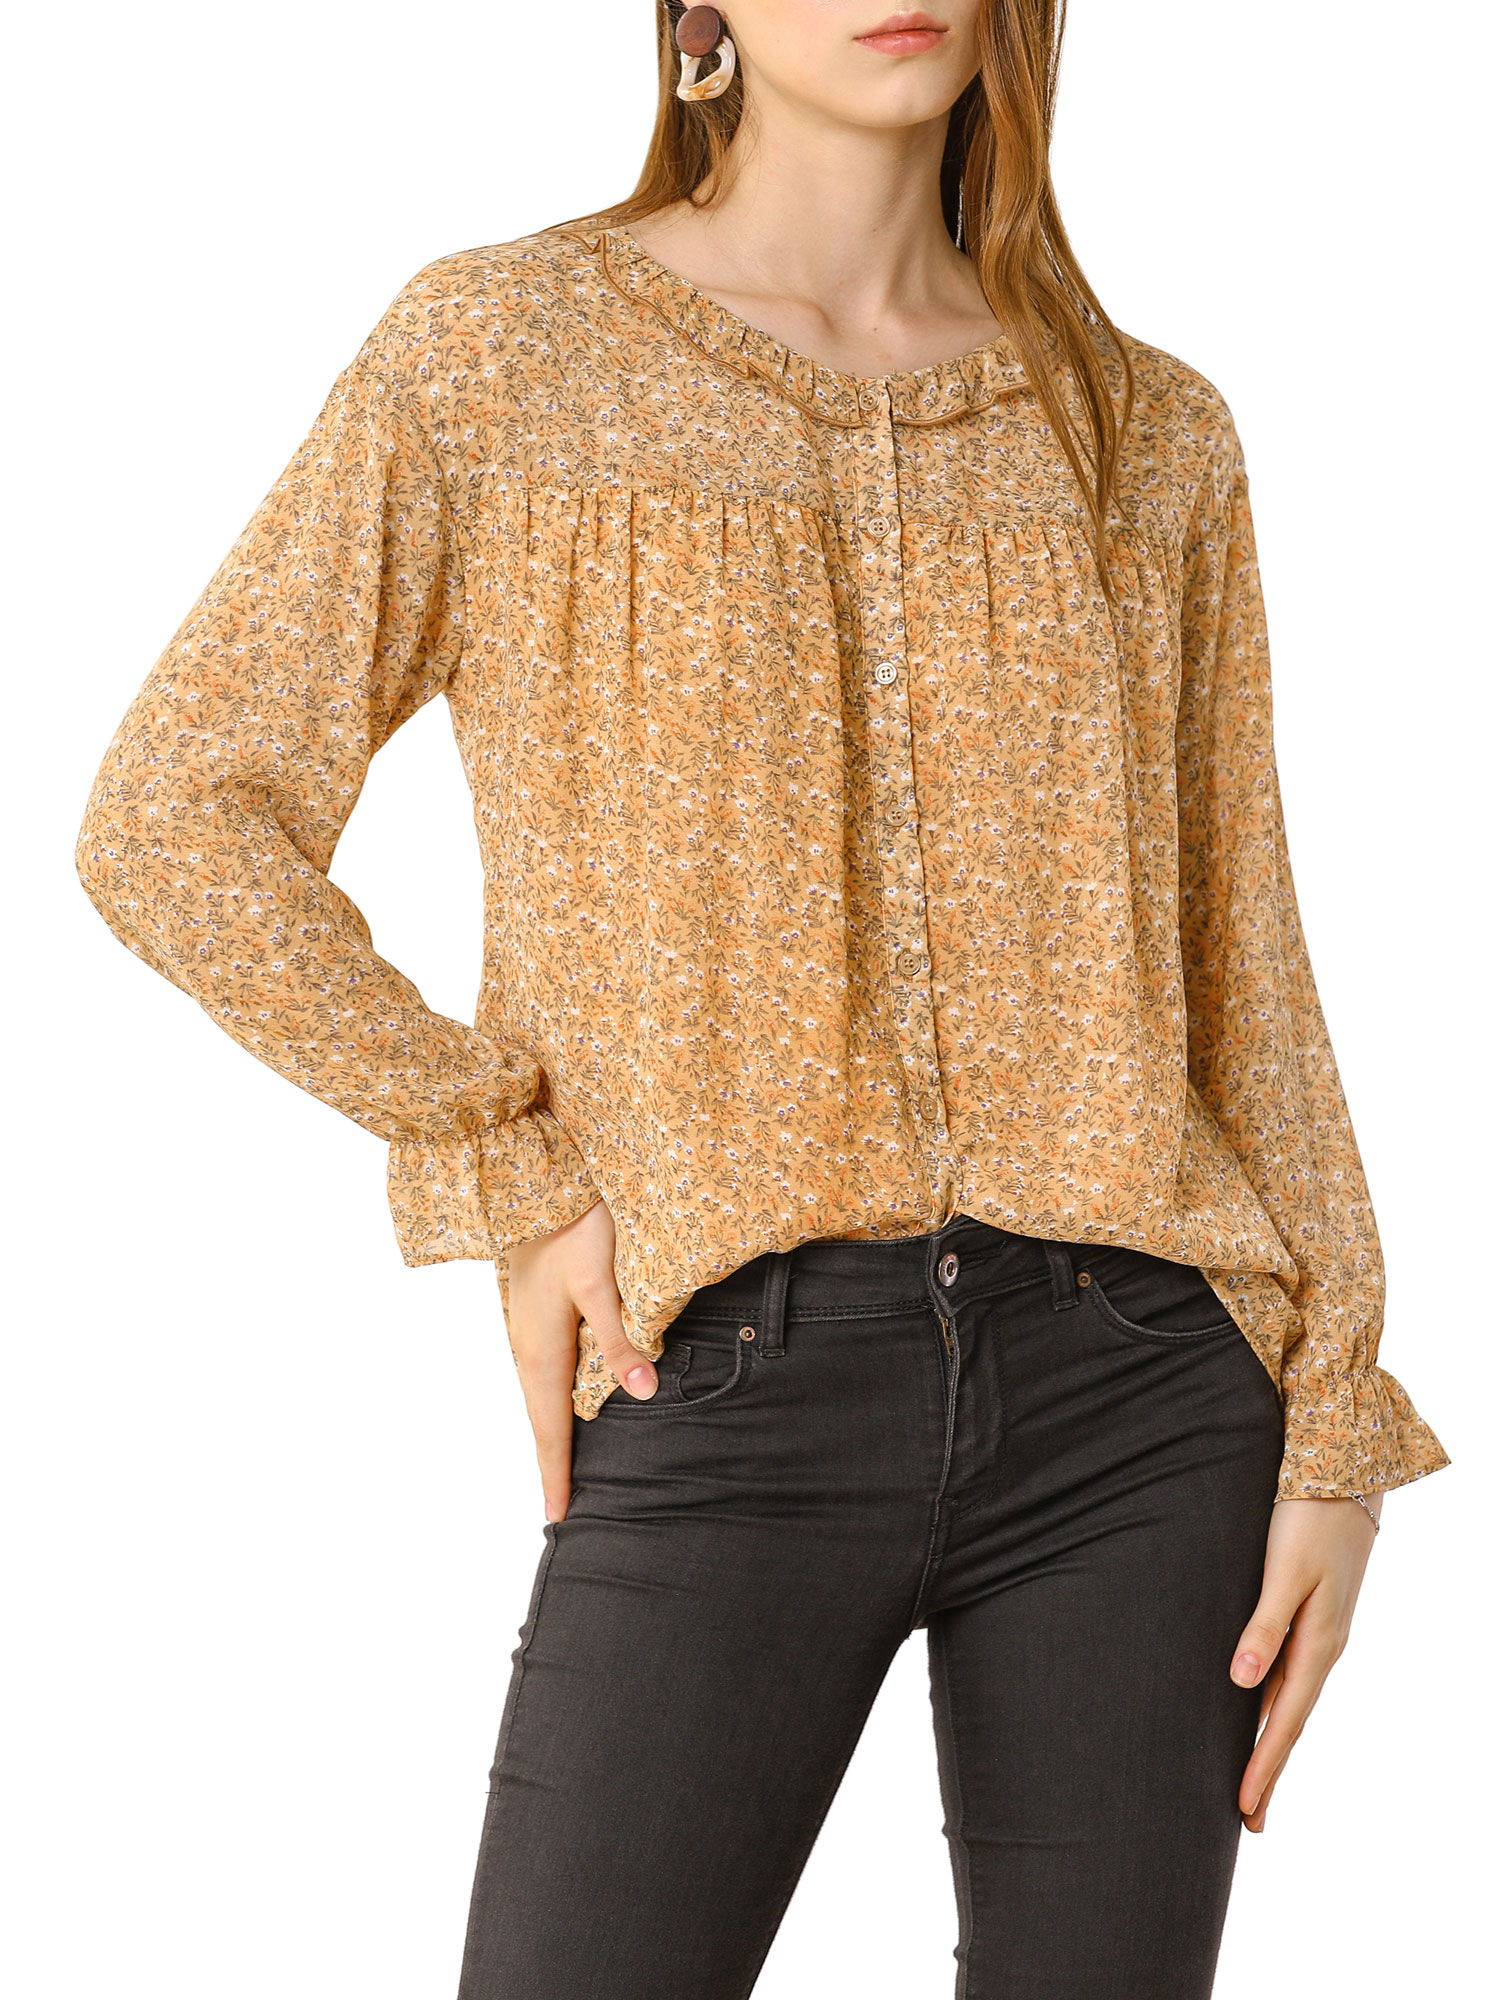 MODA NOVA Junior's Ditsy Floral Button up Long Sleeve Blouse Yellow XS - image 2 of 5